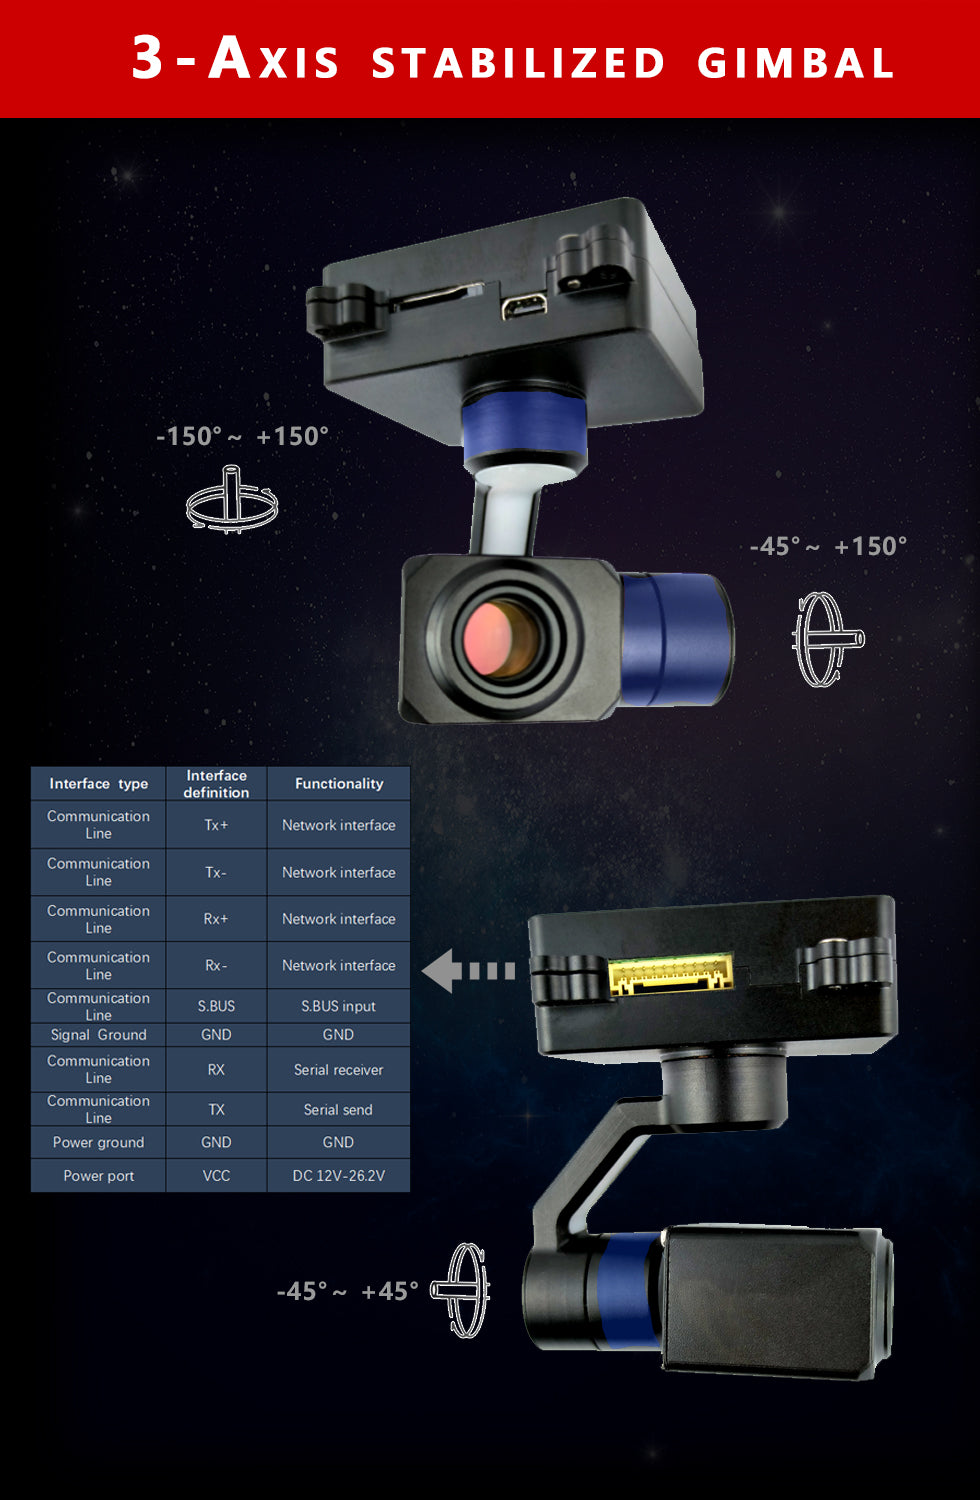 TOPOTEK KHP415 Gimbal, Camera gimbal with robust interface system for stable video transmission.